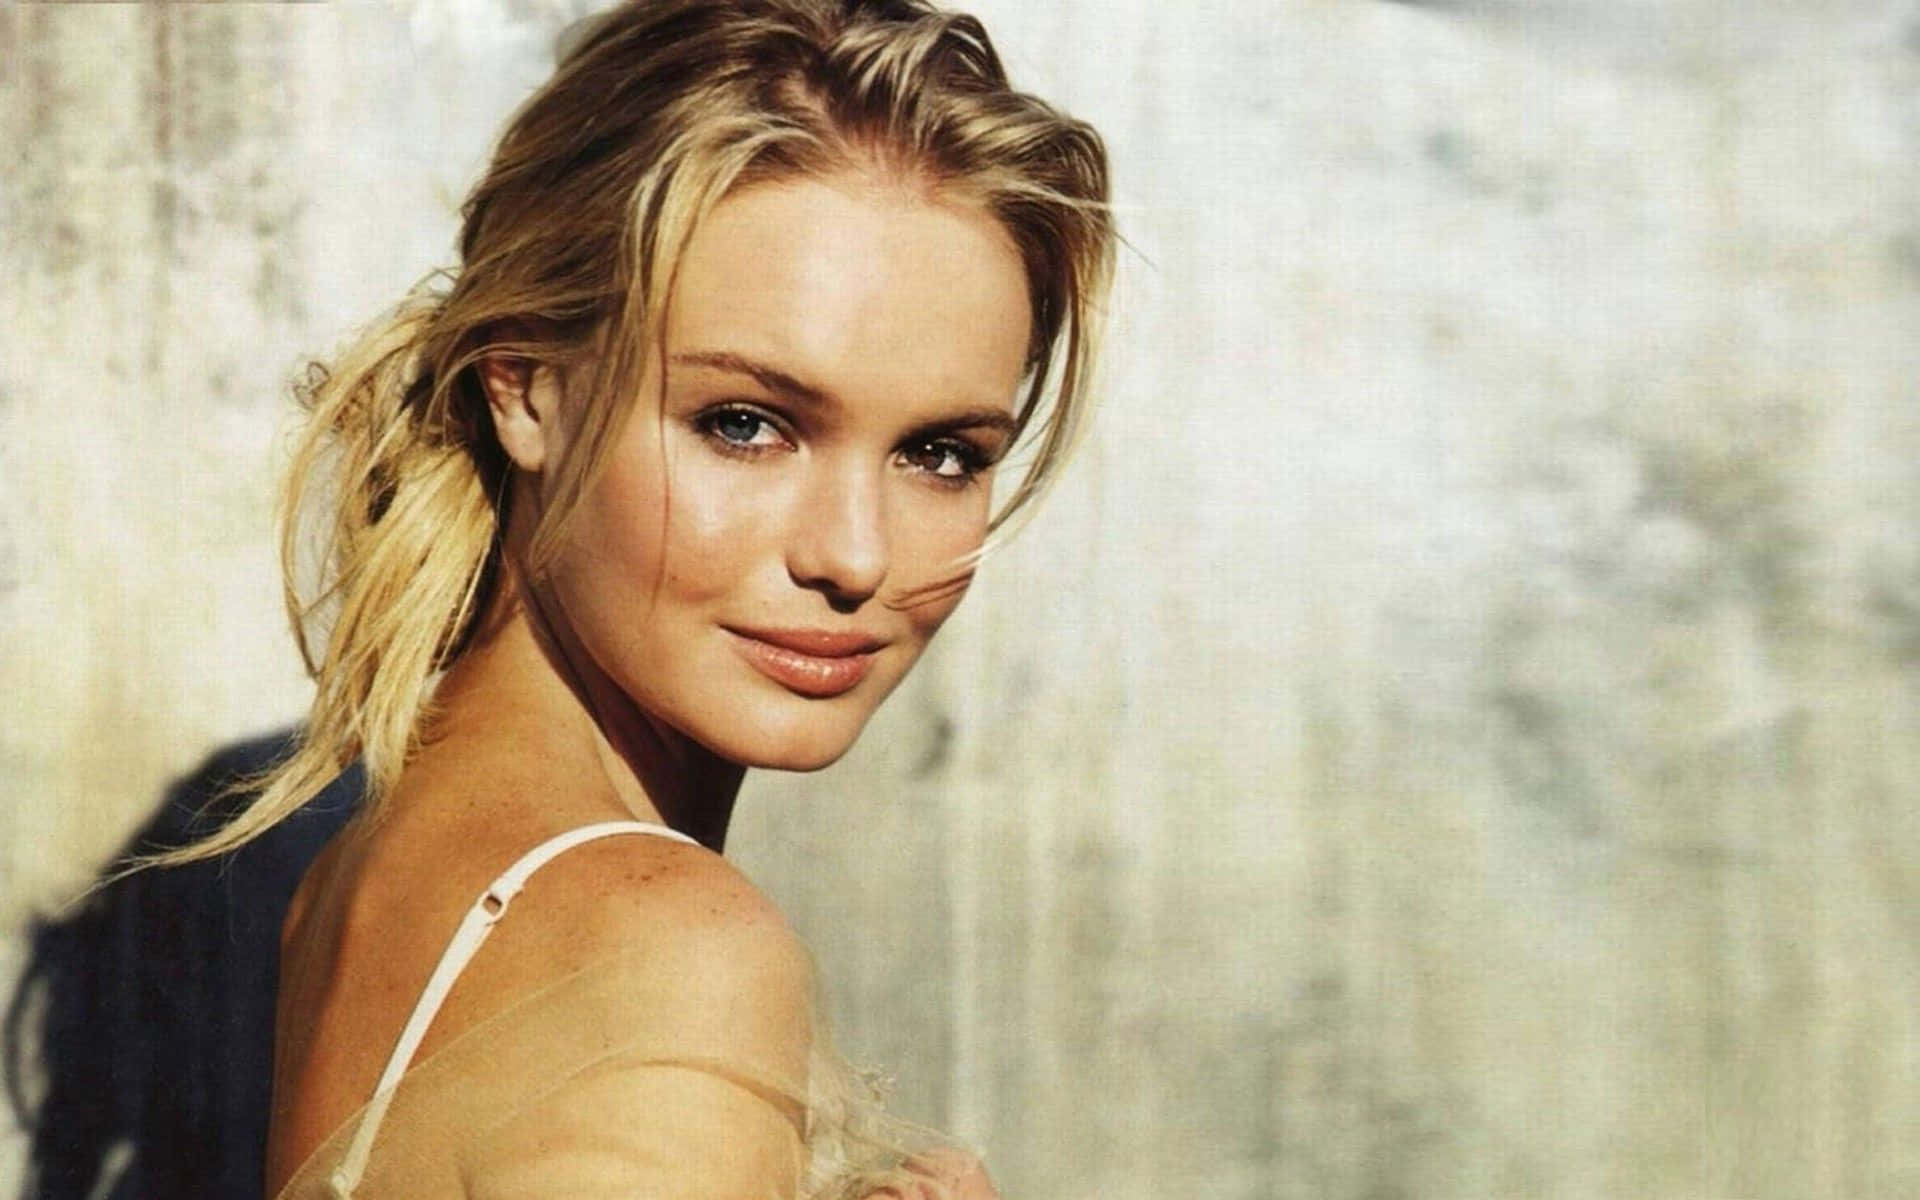 Kate Bosworth Glowing in an Elegant Outfit Wallpaper